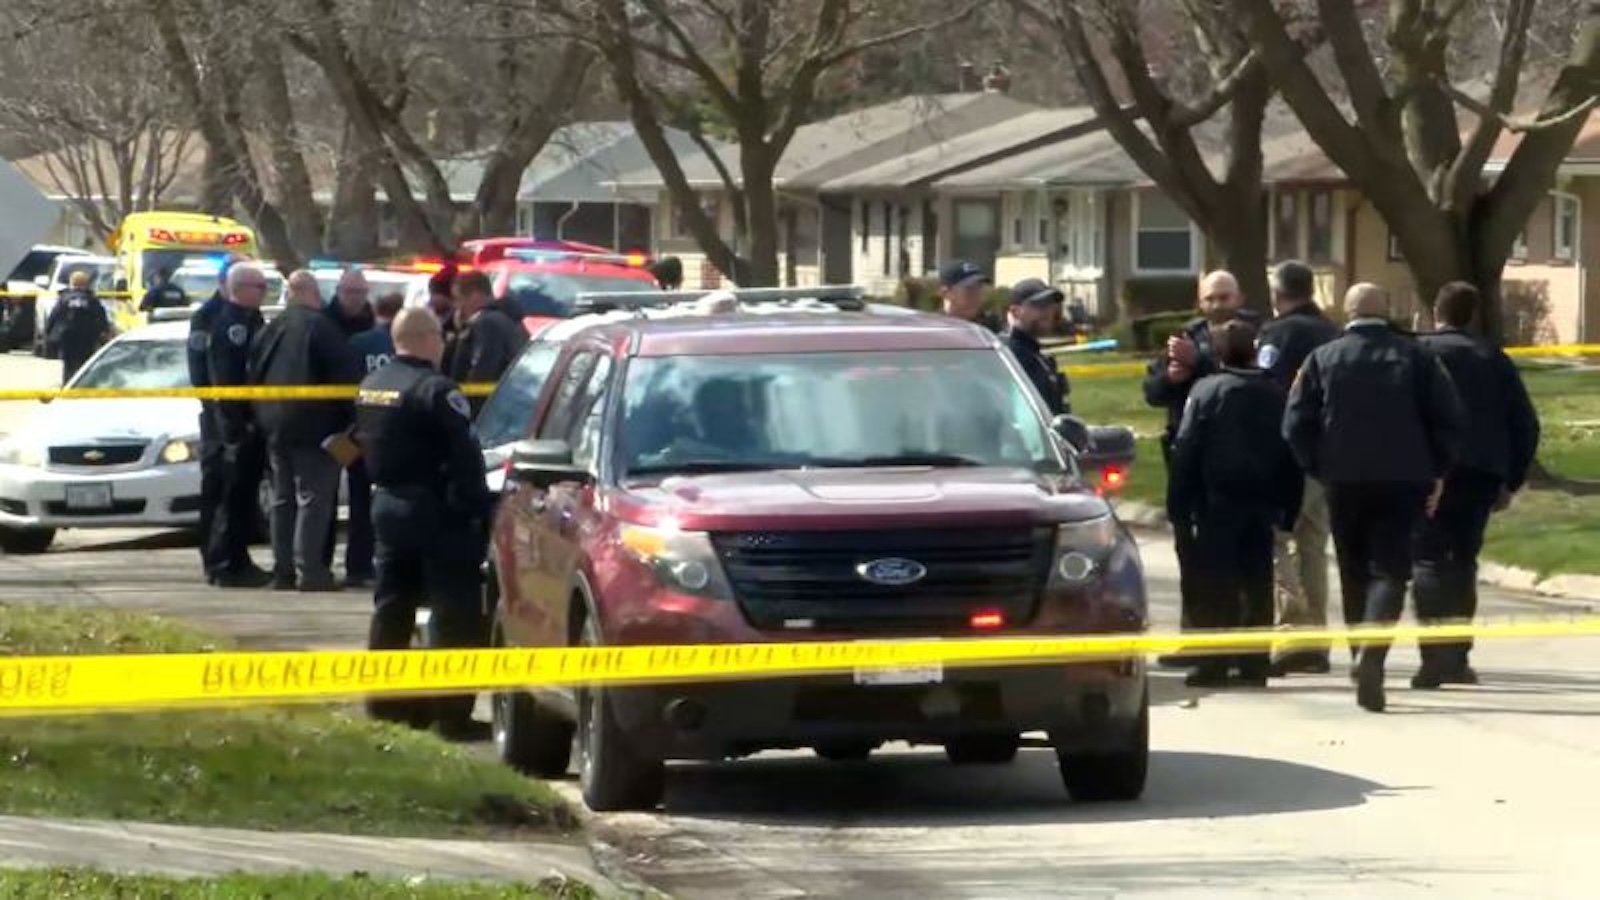 Knife attack leaves 4 dead and 7 injured in a residential area of ​​Rockford, Illinois, according to authorities